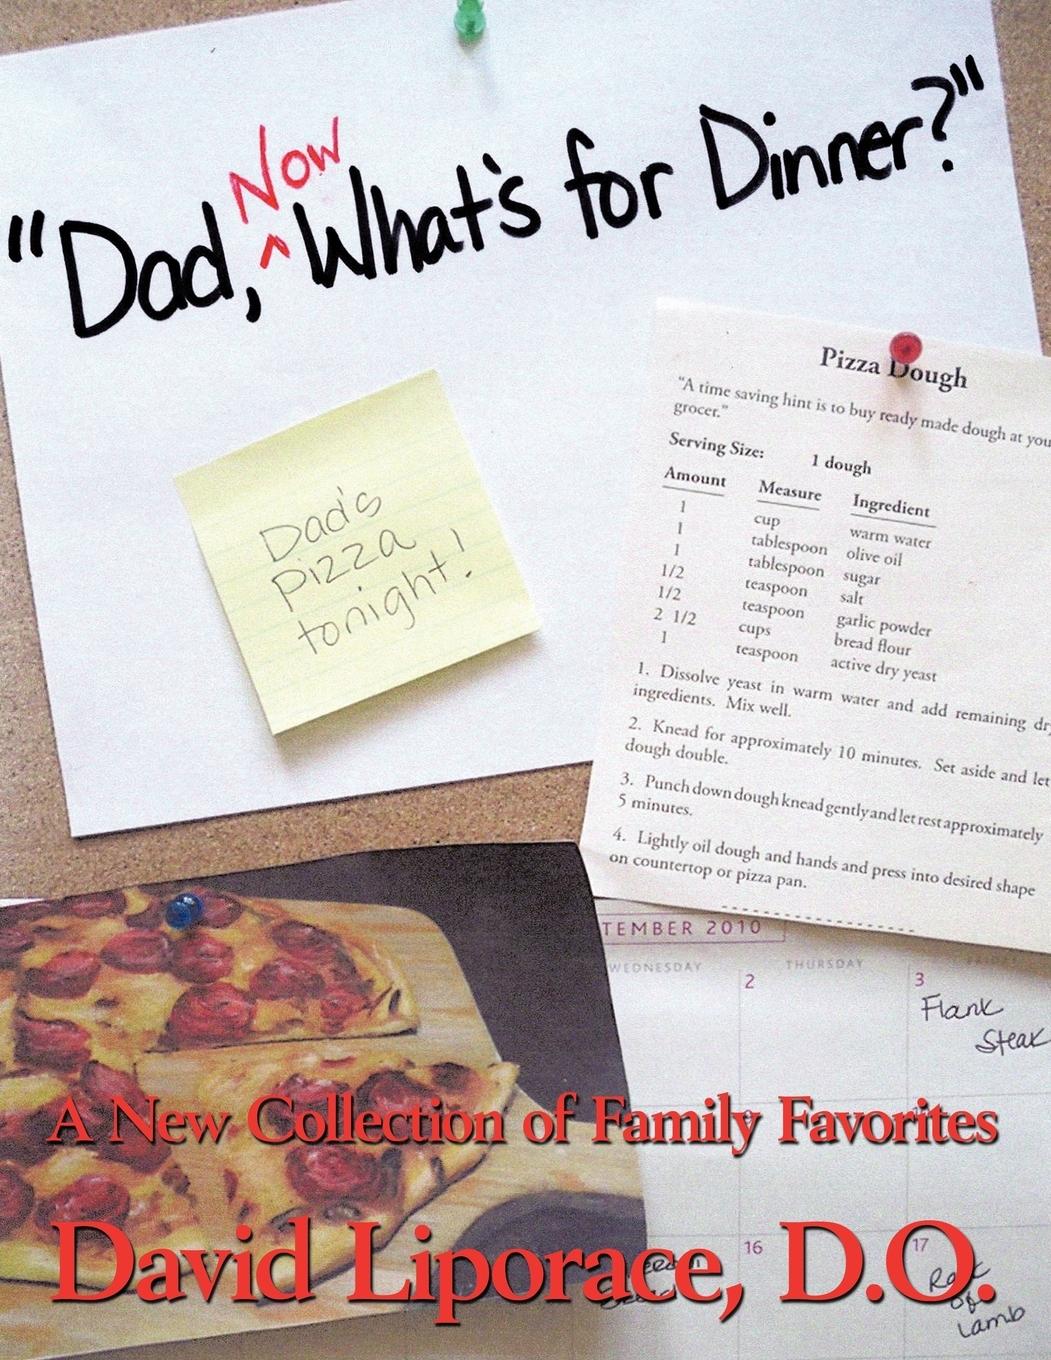 Dad, Now What s for Dinner? - Liporace D. O., David